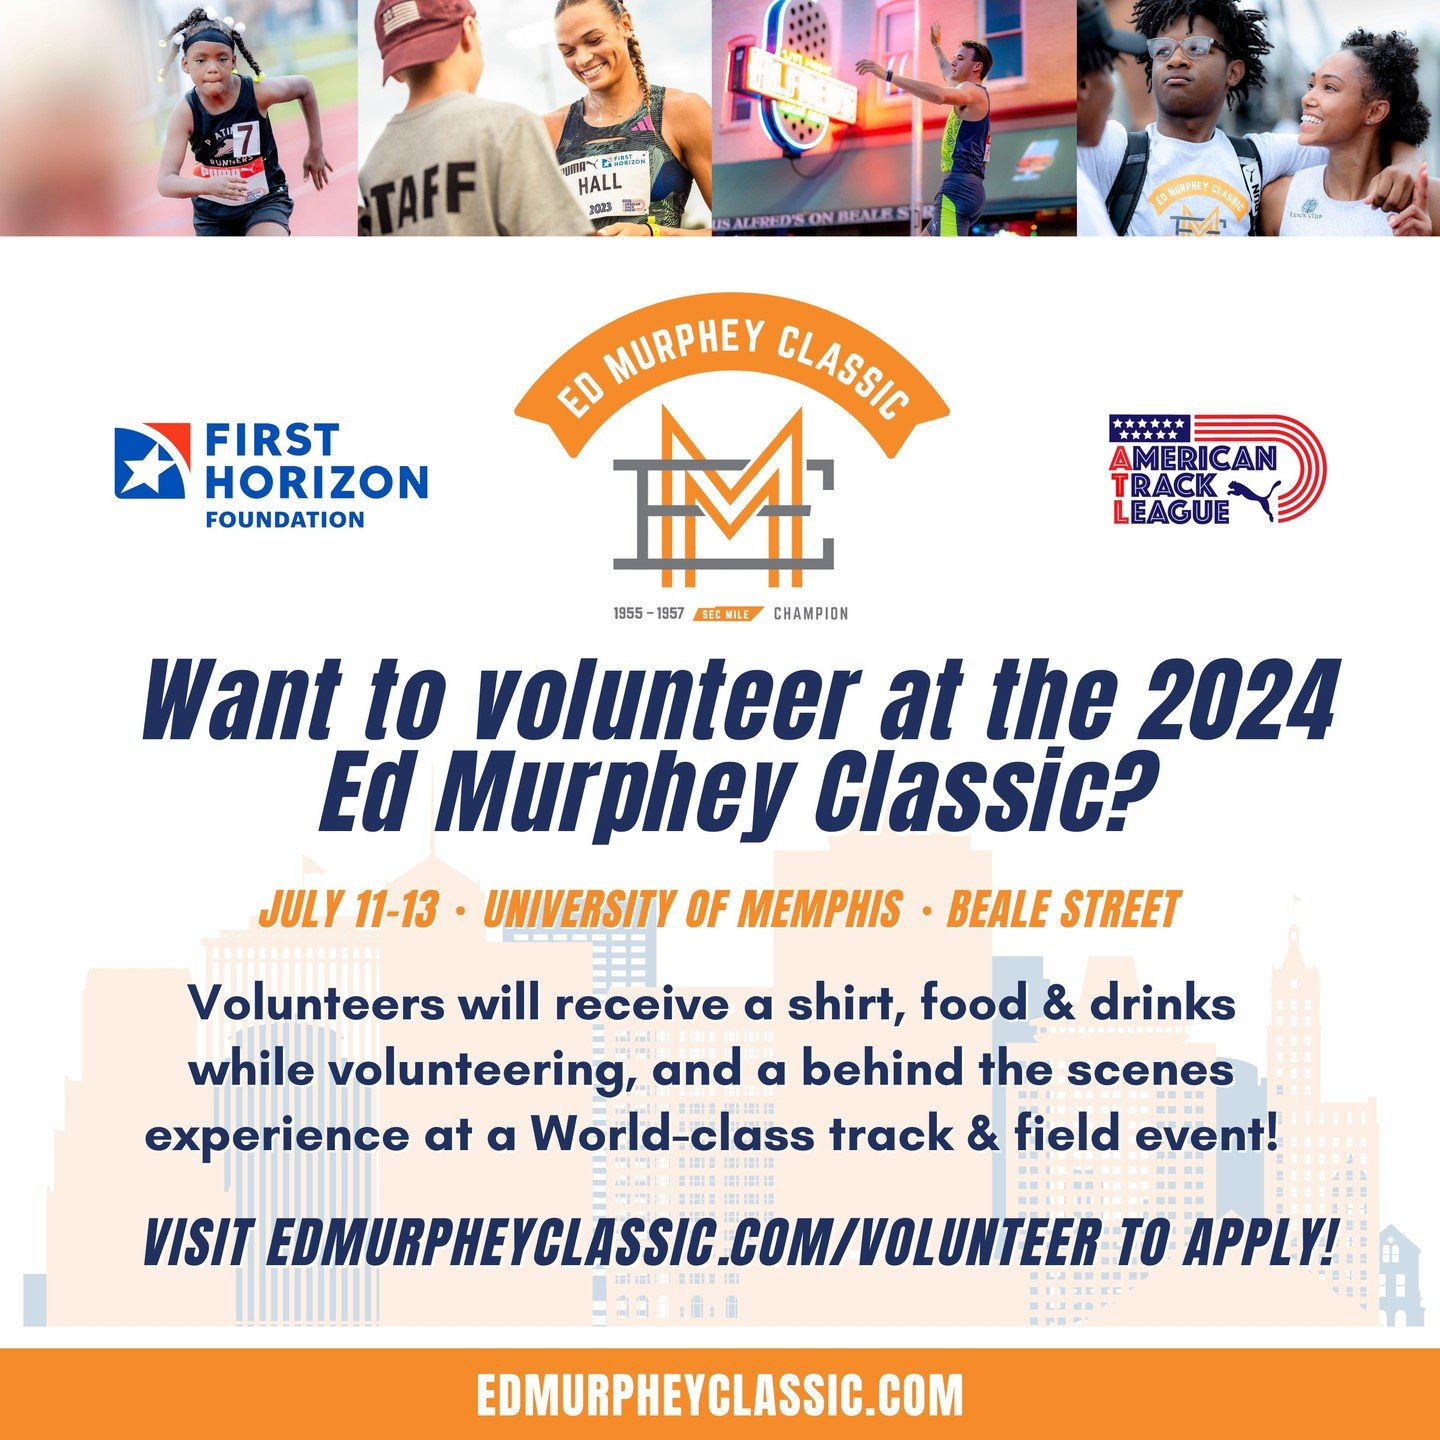 Wanna be part of one of the best Track &amp; Field events in the USA? This is your chance!

We're now recruiting volunteers for the 2024 Murphey Classic as part of the PUMA @americantrackleague July 11 and 12th at the University of Memphis Billy J. M